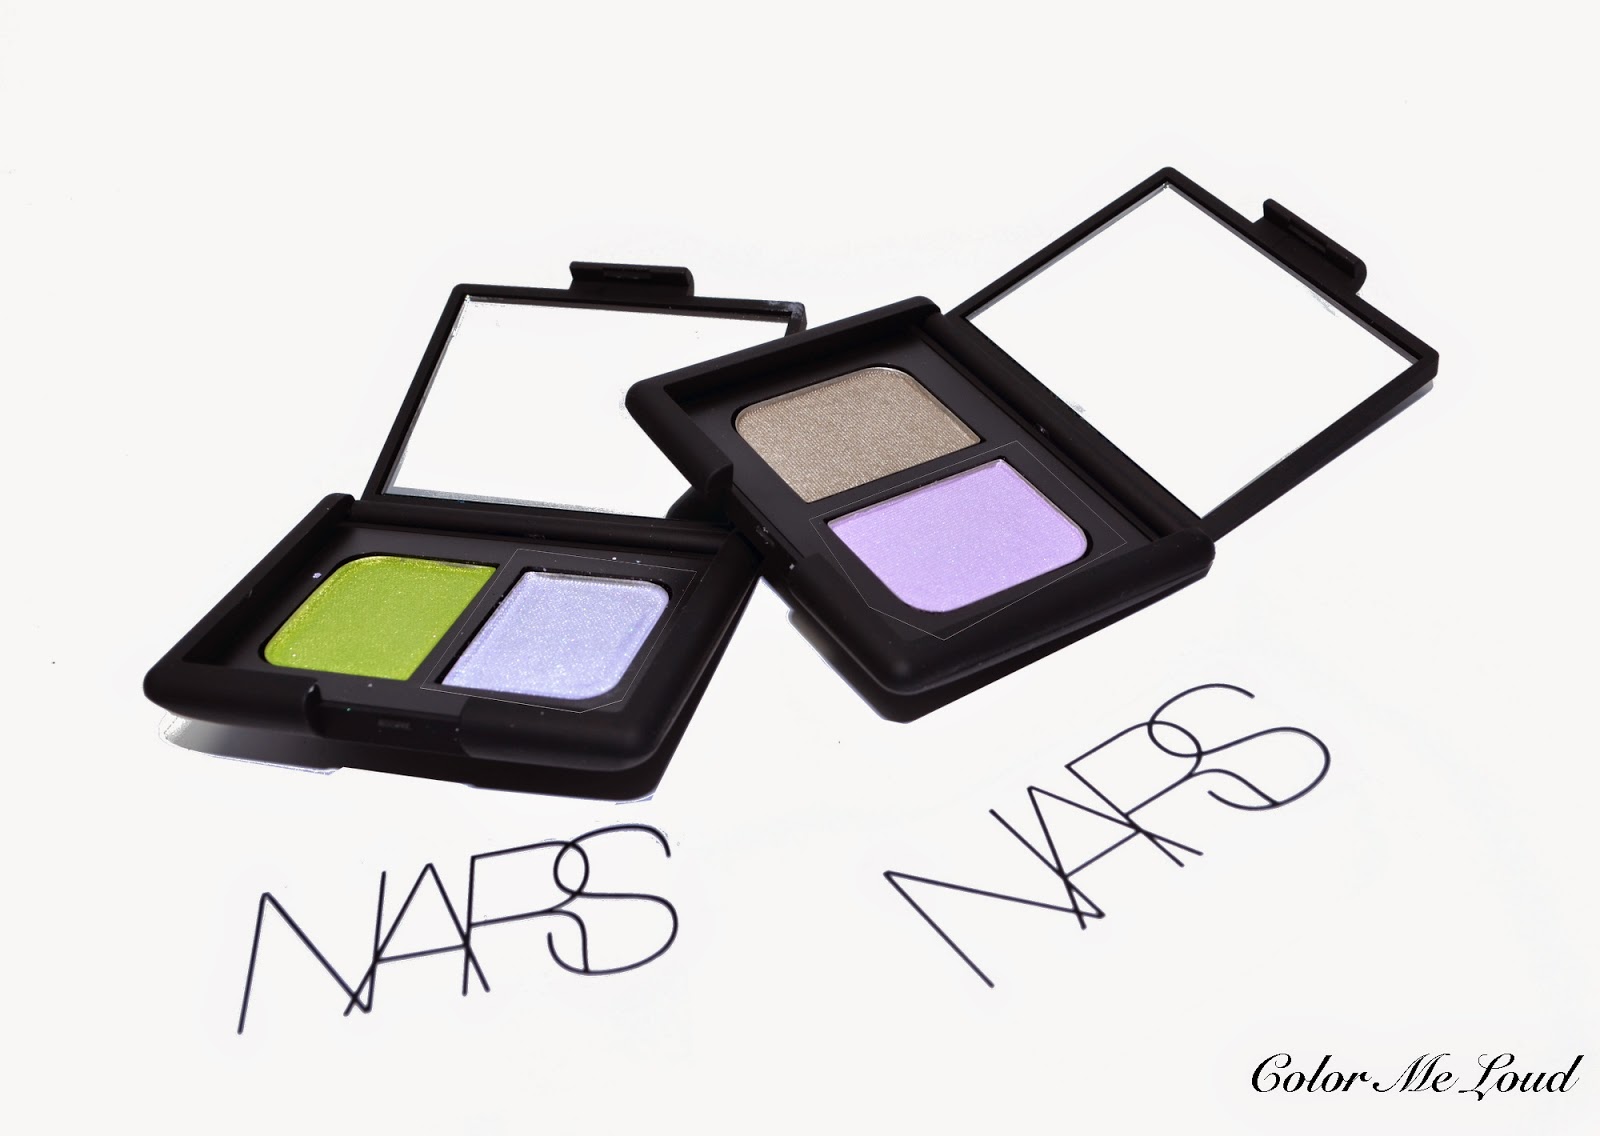 Nars Duo Eyeshadow Lost Coast and Tropical Princess for Summer 2014 Adult Swim Collection, Swatch, Review & FOTD